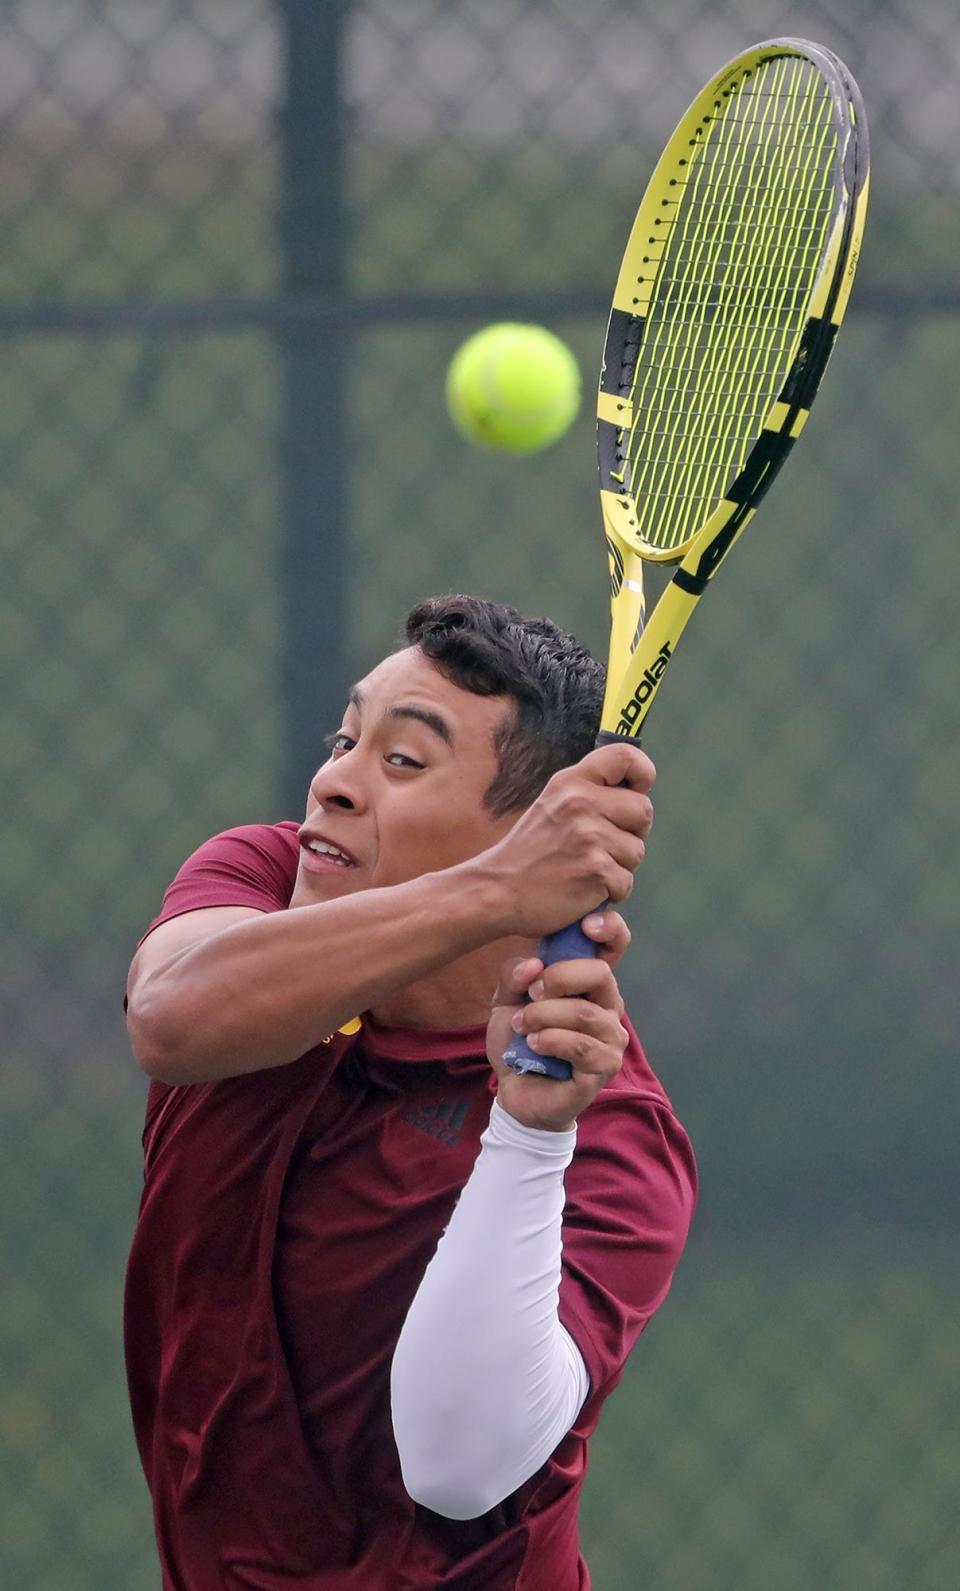 Walsh Jesuit's Caleb Miller sends a shot back over the net  during a tennis match against Brecksville on Wednesday.